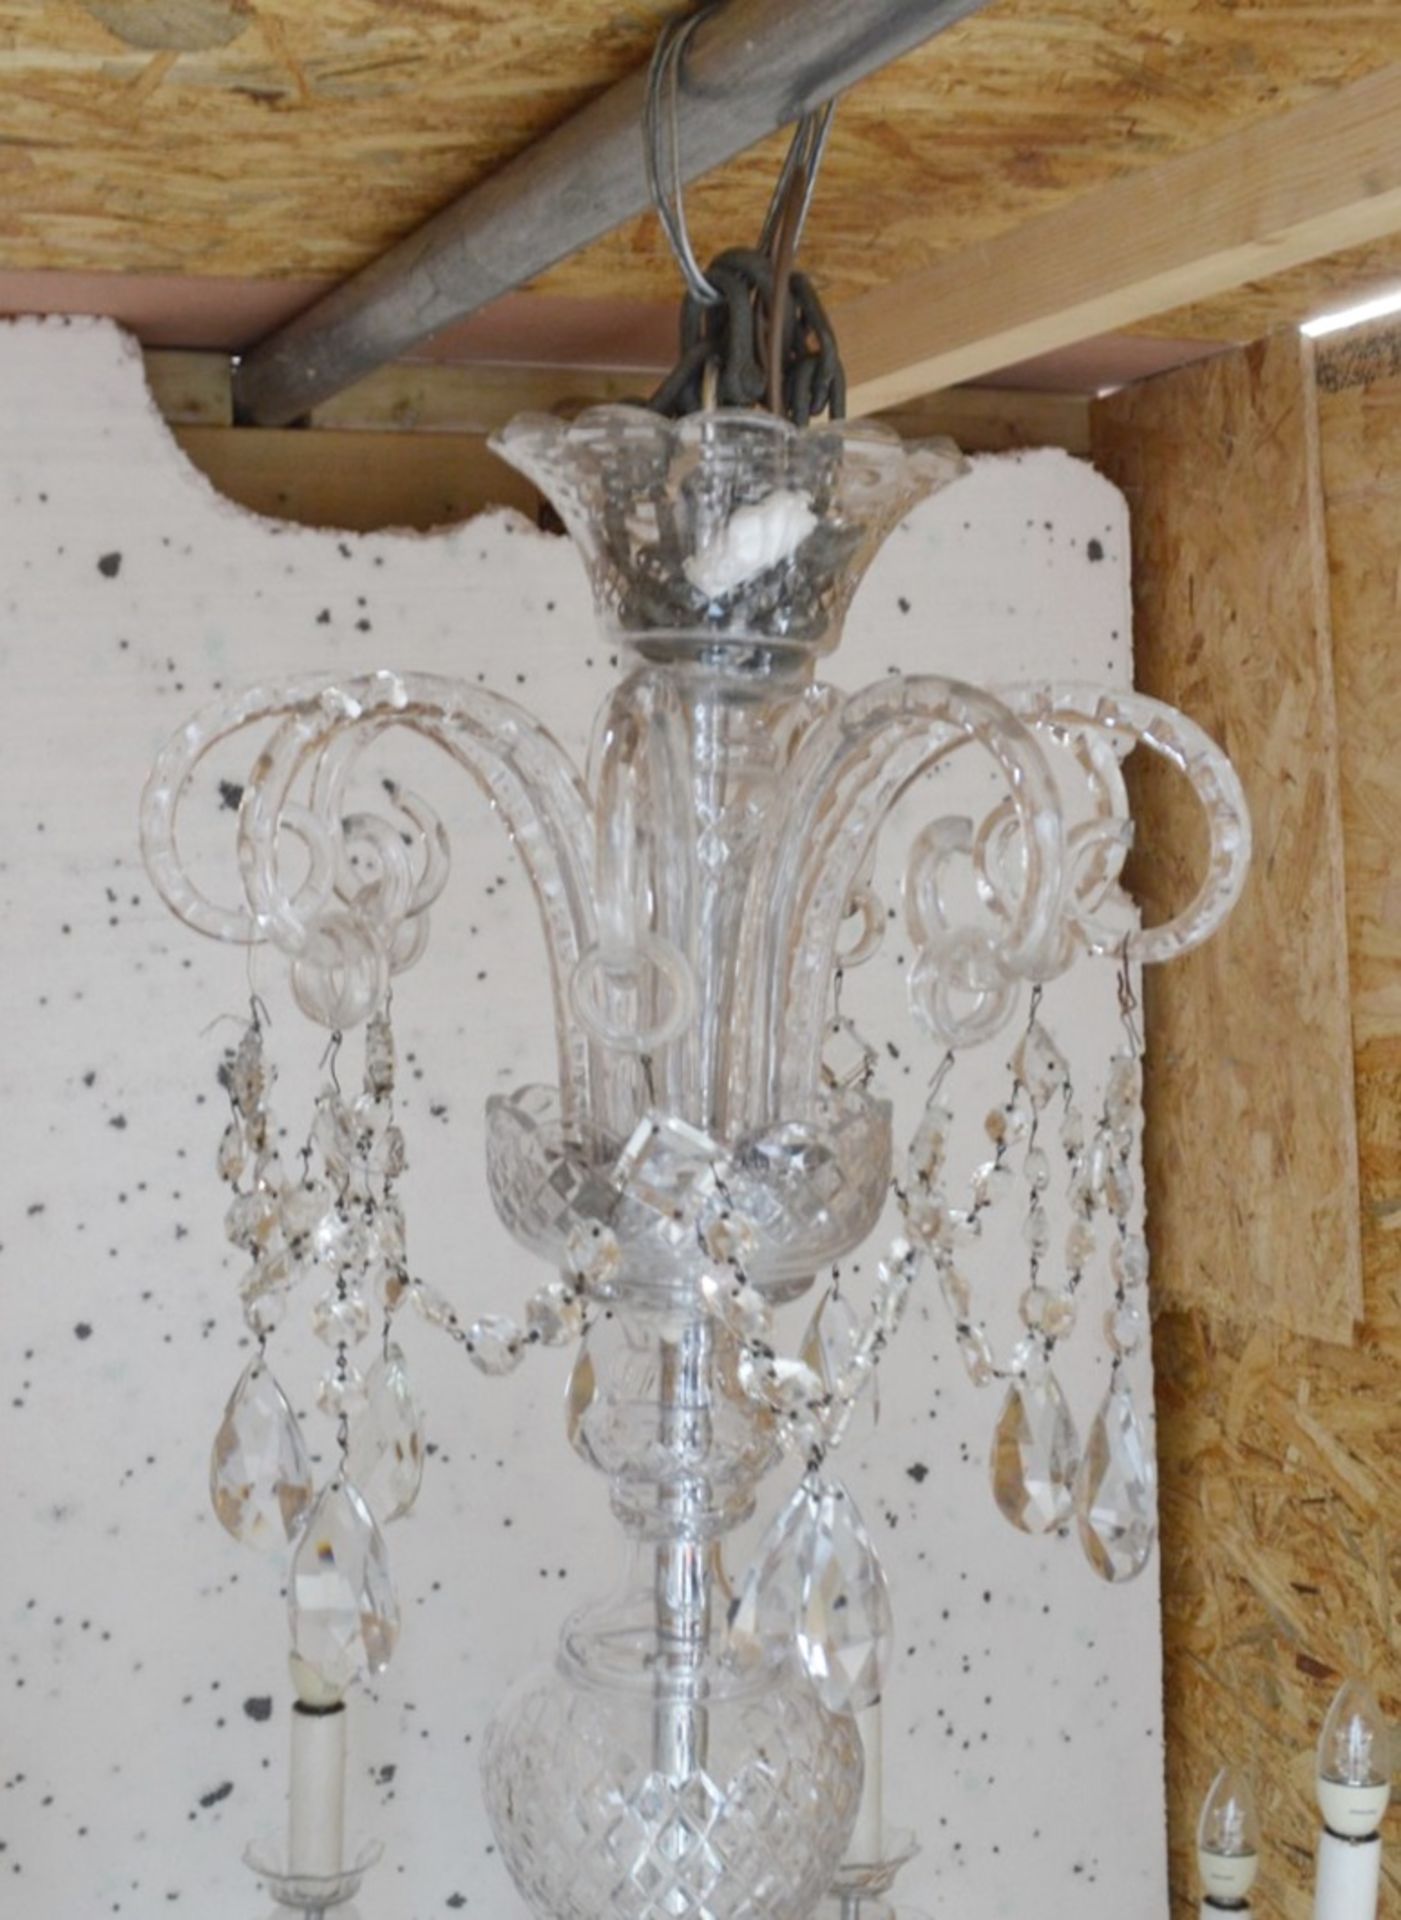 1 x Huge Commercial Ornate Georgian-Style Glass Chandelier - Dimensions: Height 150 x Diameter 125cm - Image 7 of 8